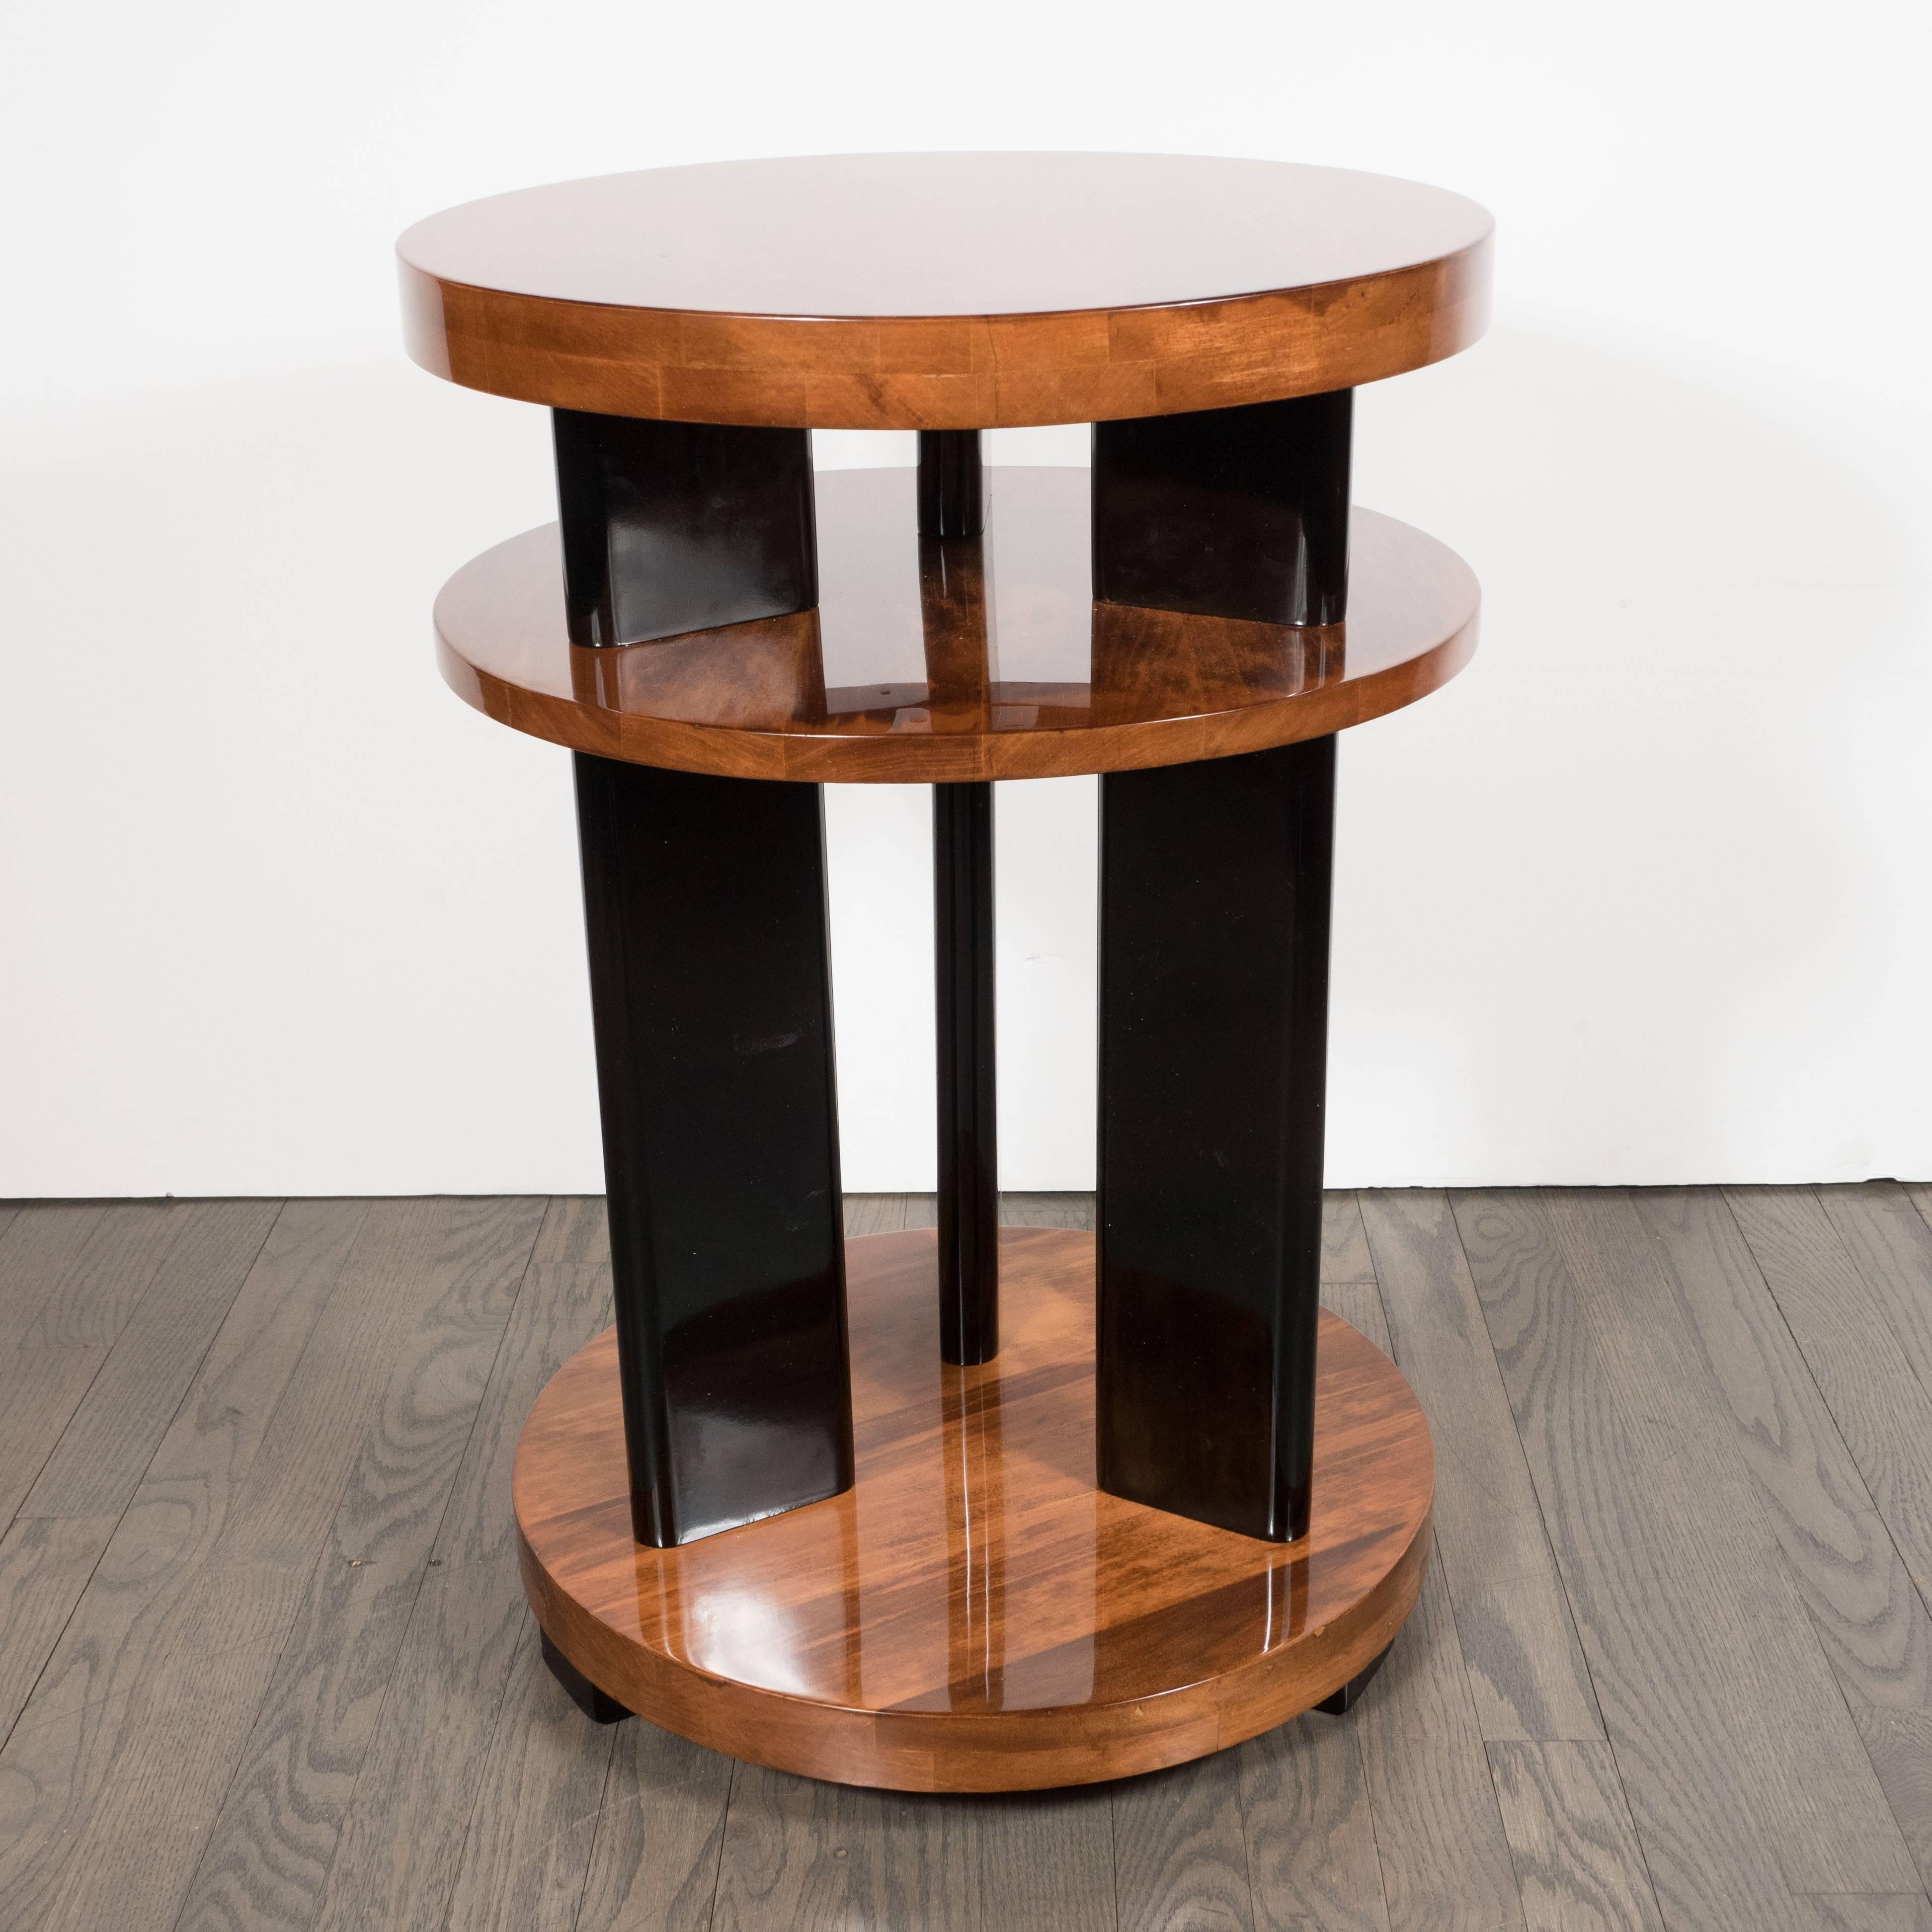 Mid-20th Century Art Deco Three-Tiered Black Lacquer and Bookmatched Walnut Occasional Table